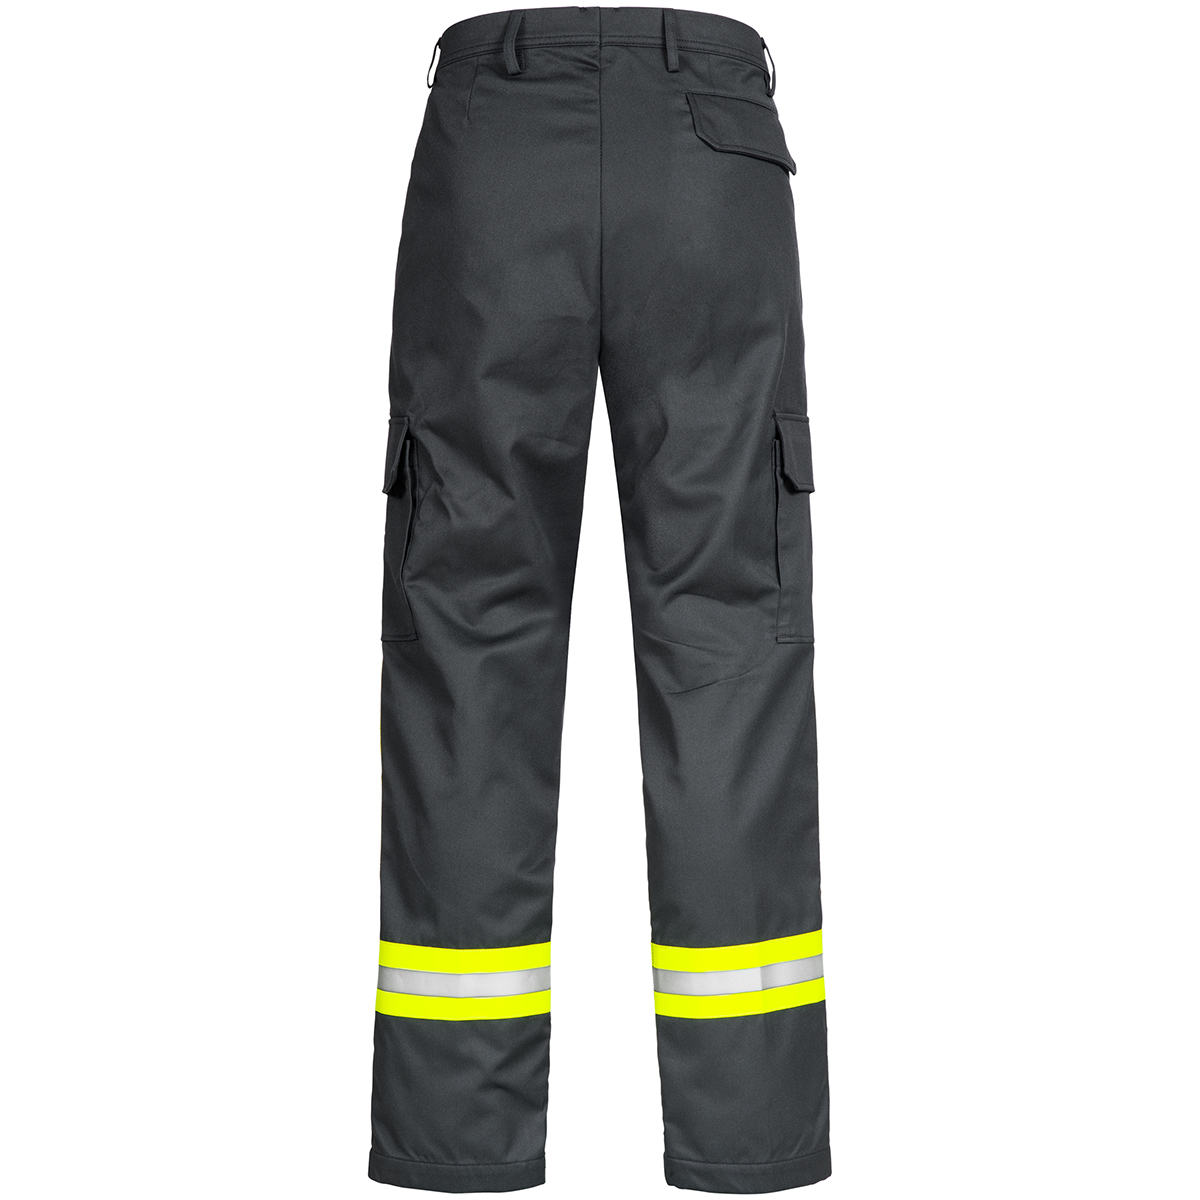 Trousers | HB Protective Wear GmbH & Co. KG